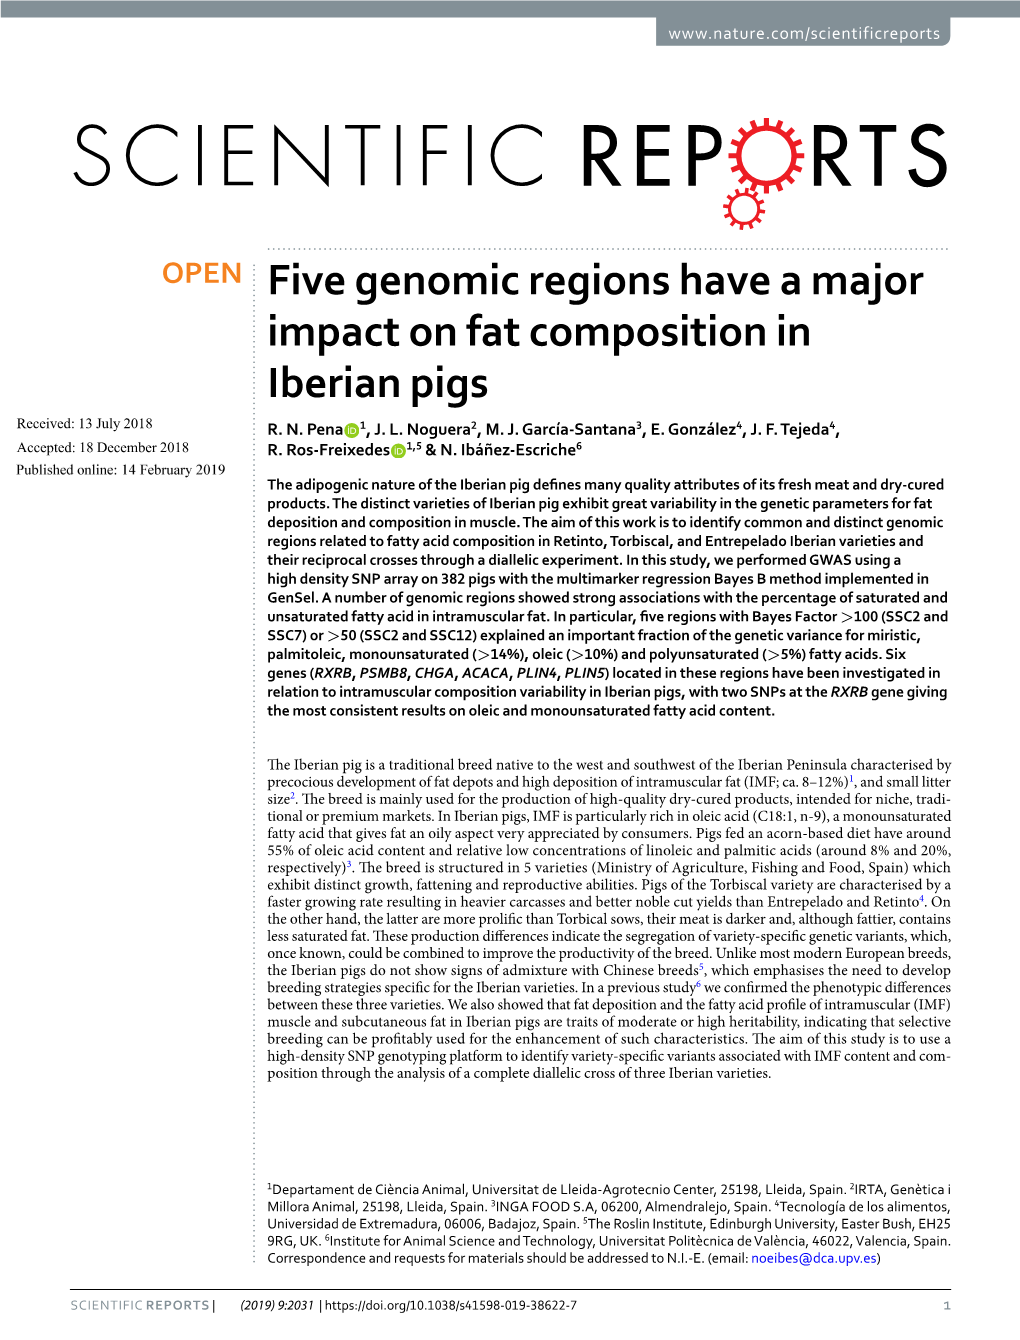 Five Genomic Regions Have a Major Impact on Fat Composition in Iberian Pigs Received: 13 July 2018 R